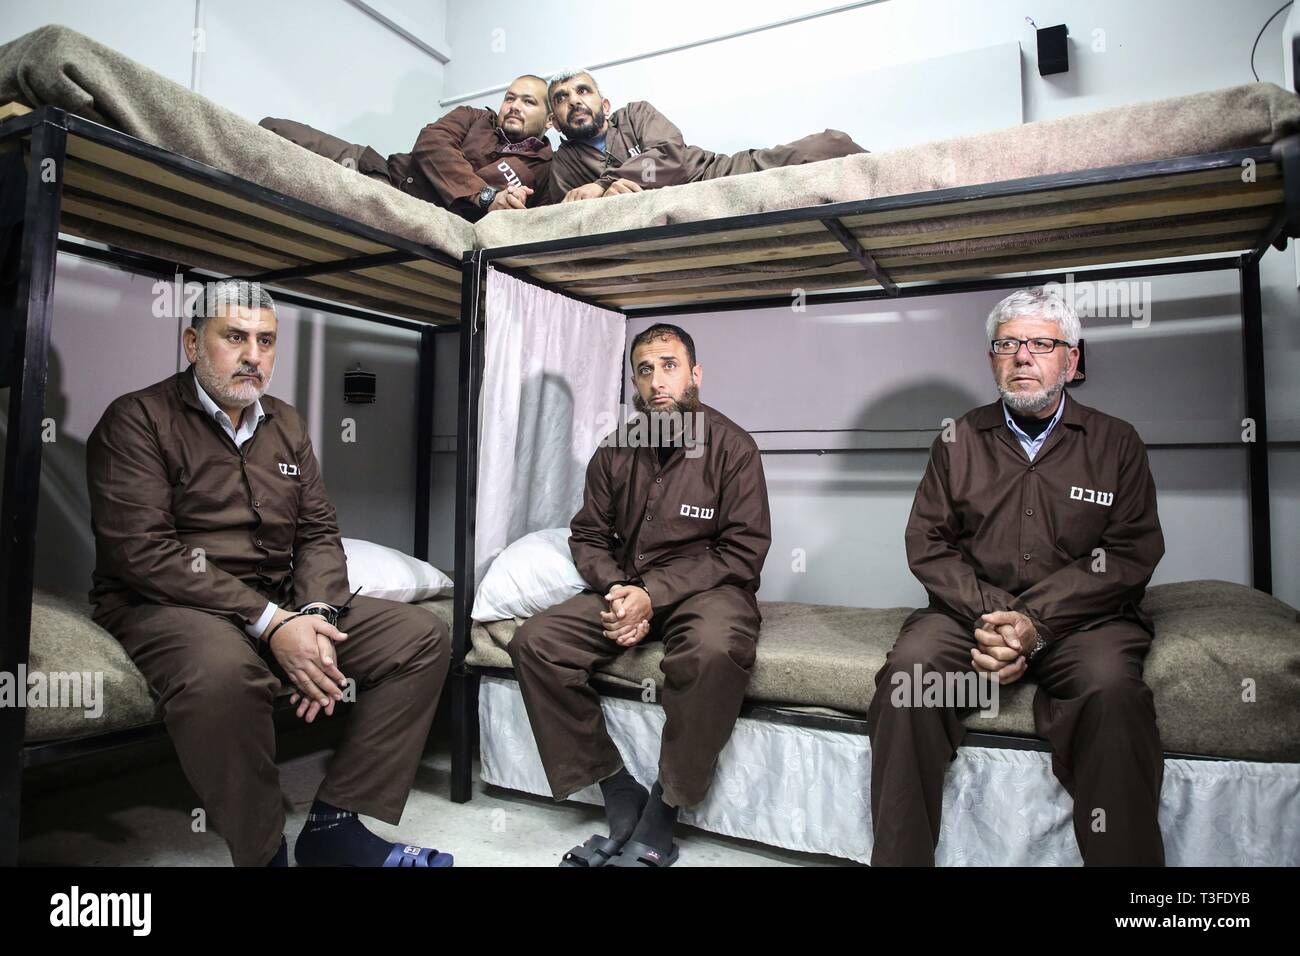 Gaza City, The Gaza Strip, Palestine. 9th Apr, 2019. Palestinian political figures in Gaza city show solidarity with Palestinian prisoners in Israeli prisons by simulation the prisons Life. Credit: Hassan Jedi/Quds Net News/ZUMA Wire/Alamy Live News Stock Photo